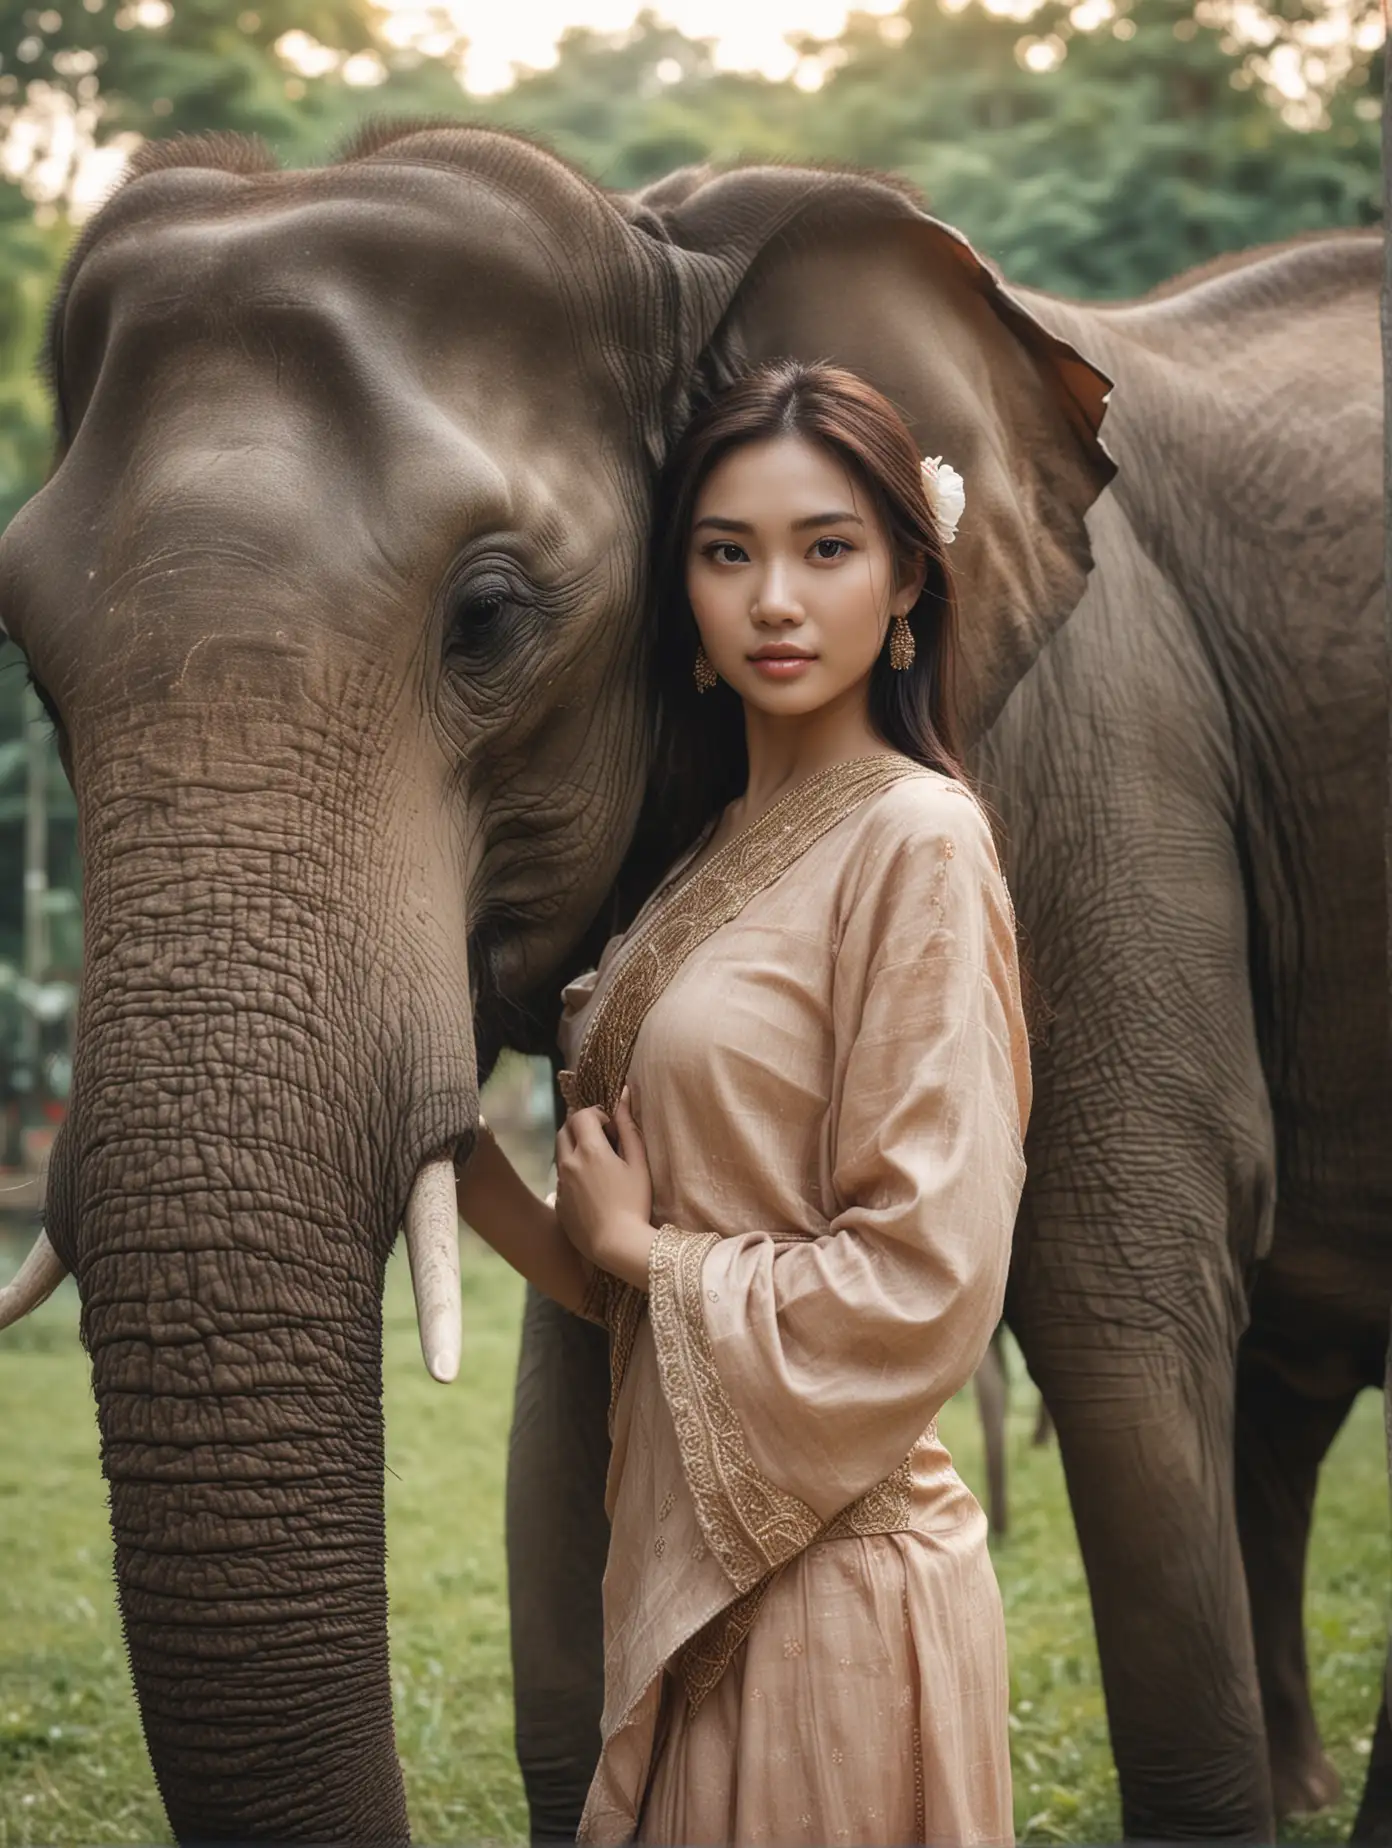 Photo of Thai beauty posing with elephant, on outdoor lawn, face like camera, confident eyes. Soft light style, cinematic style, surreal style portrait photos, high resolution, natural color grading, no contrast, clean and clear focus.